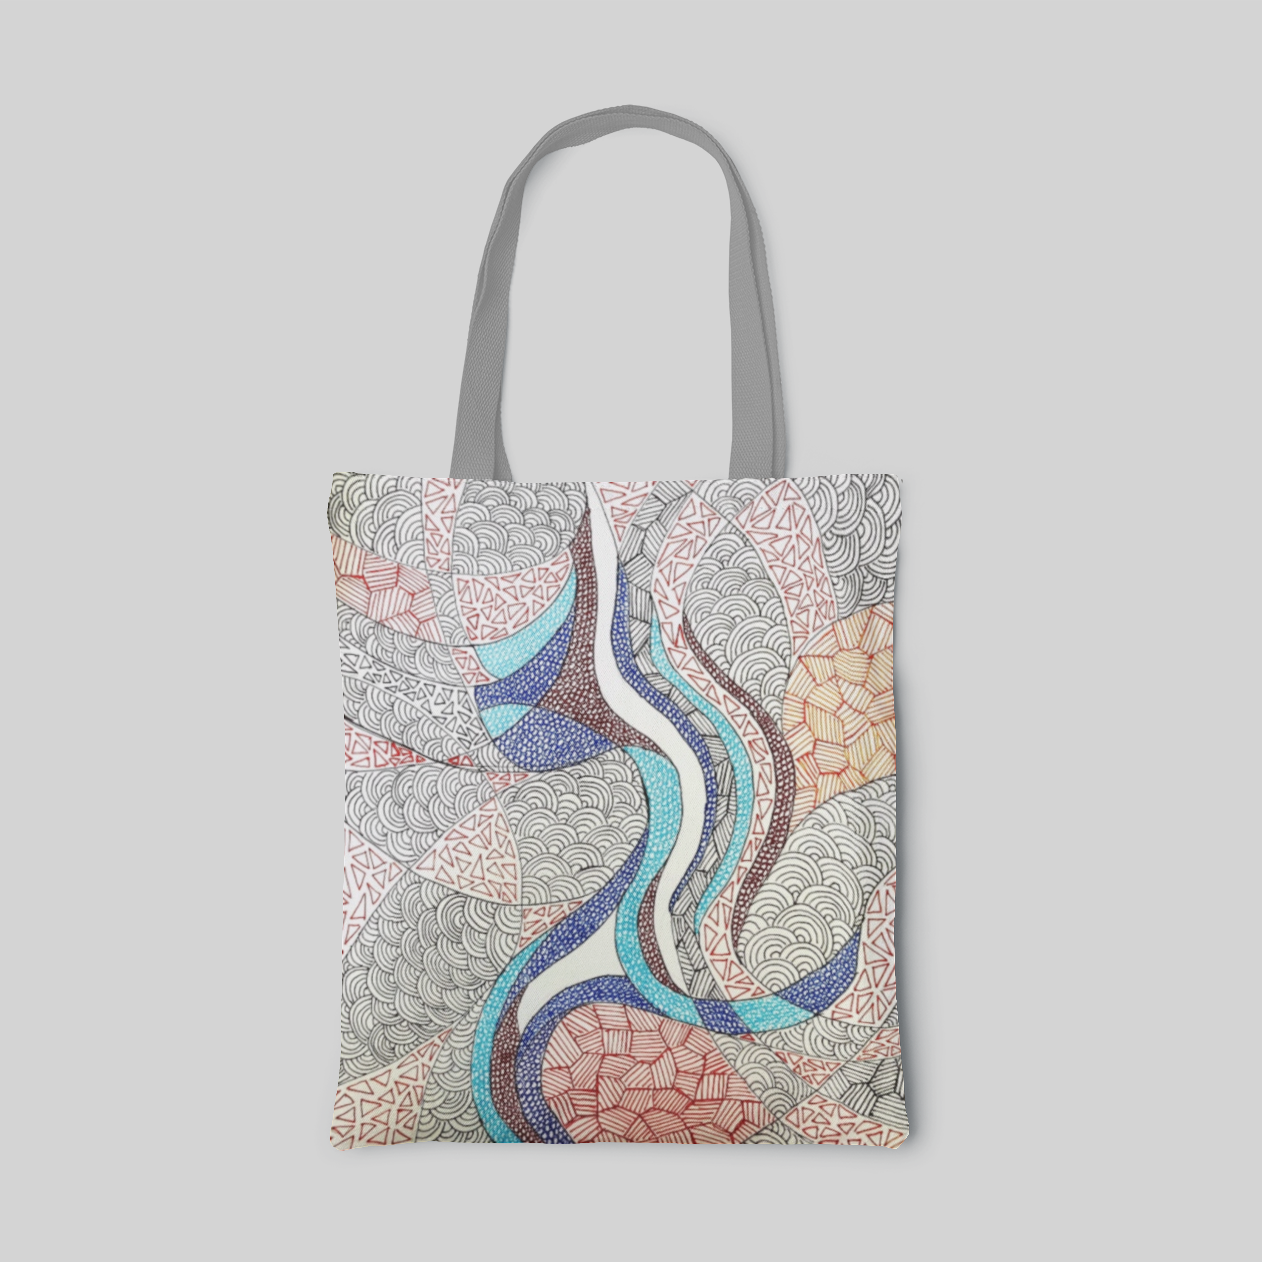 abstract designed tote bag with grey handles, and drawing different patterns with red, blue, yellow, brown and black pen, front side